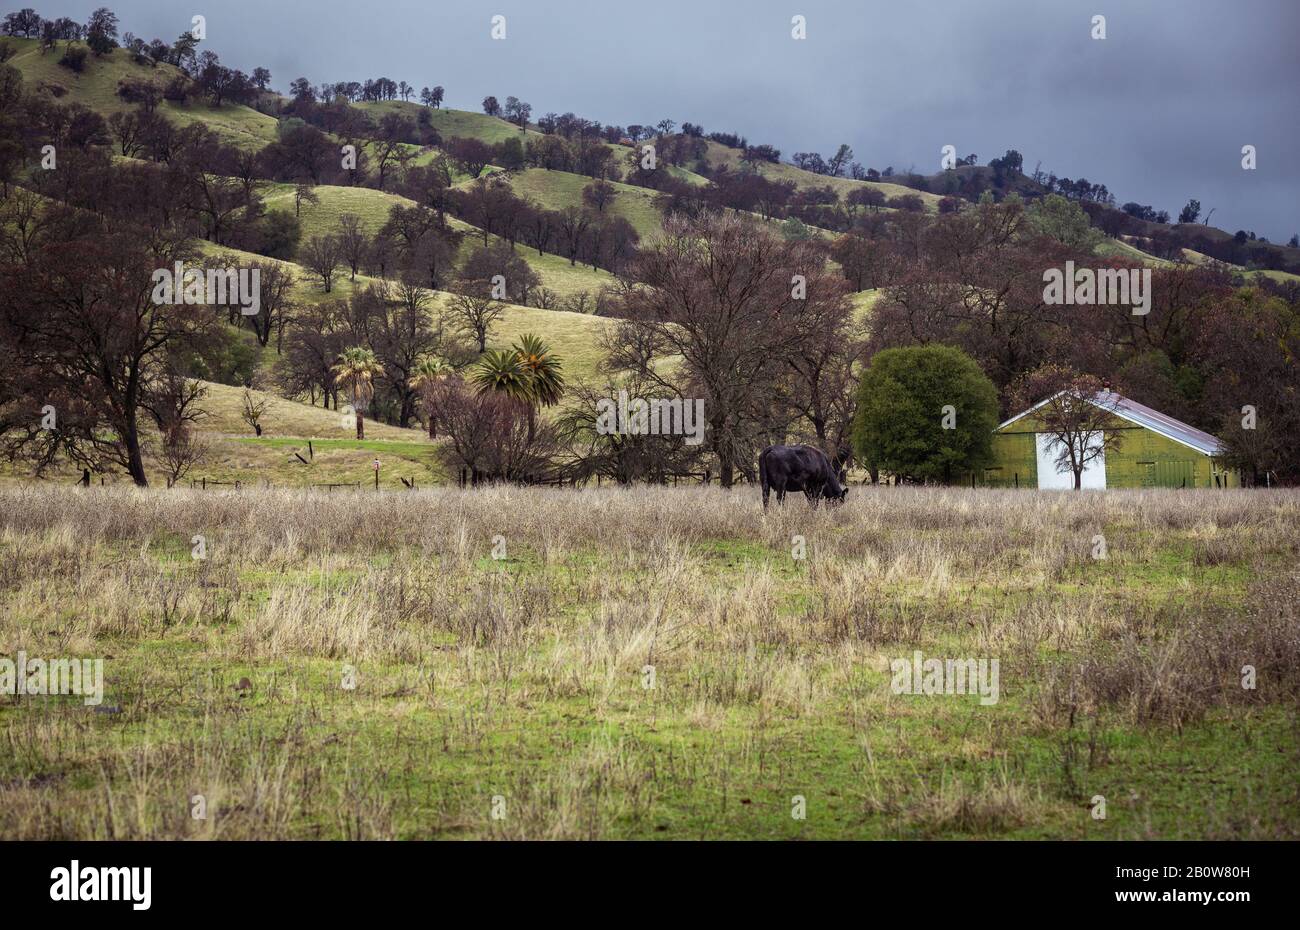 A winter scene in Northern California where the grass turns from beige to green after a dry summer & much needed rain. Lone Cow & Green Barn Stock Photo